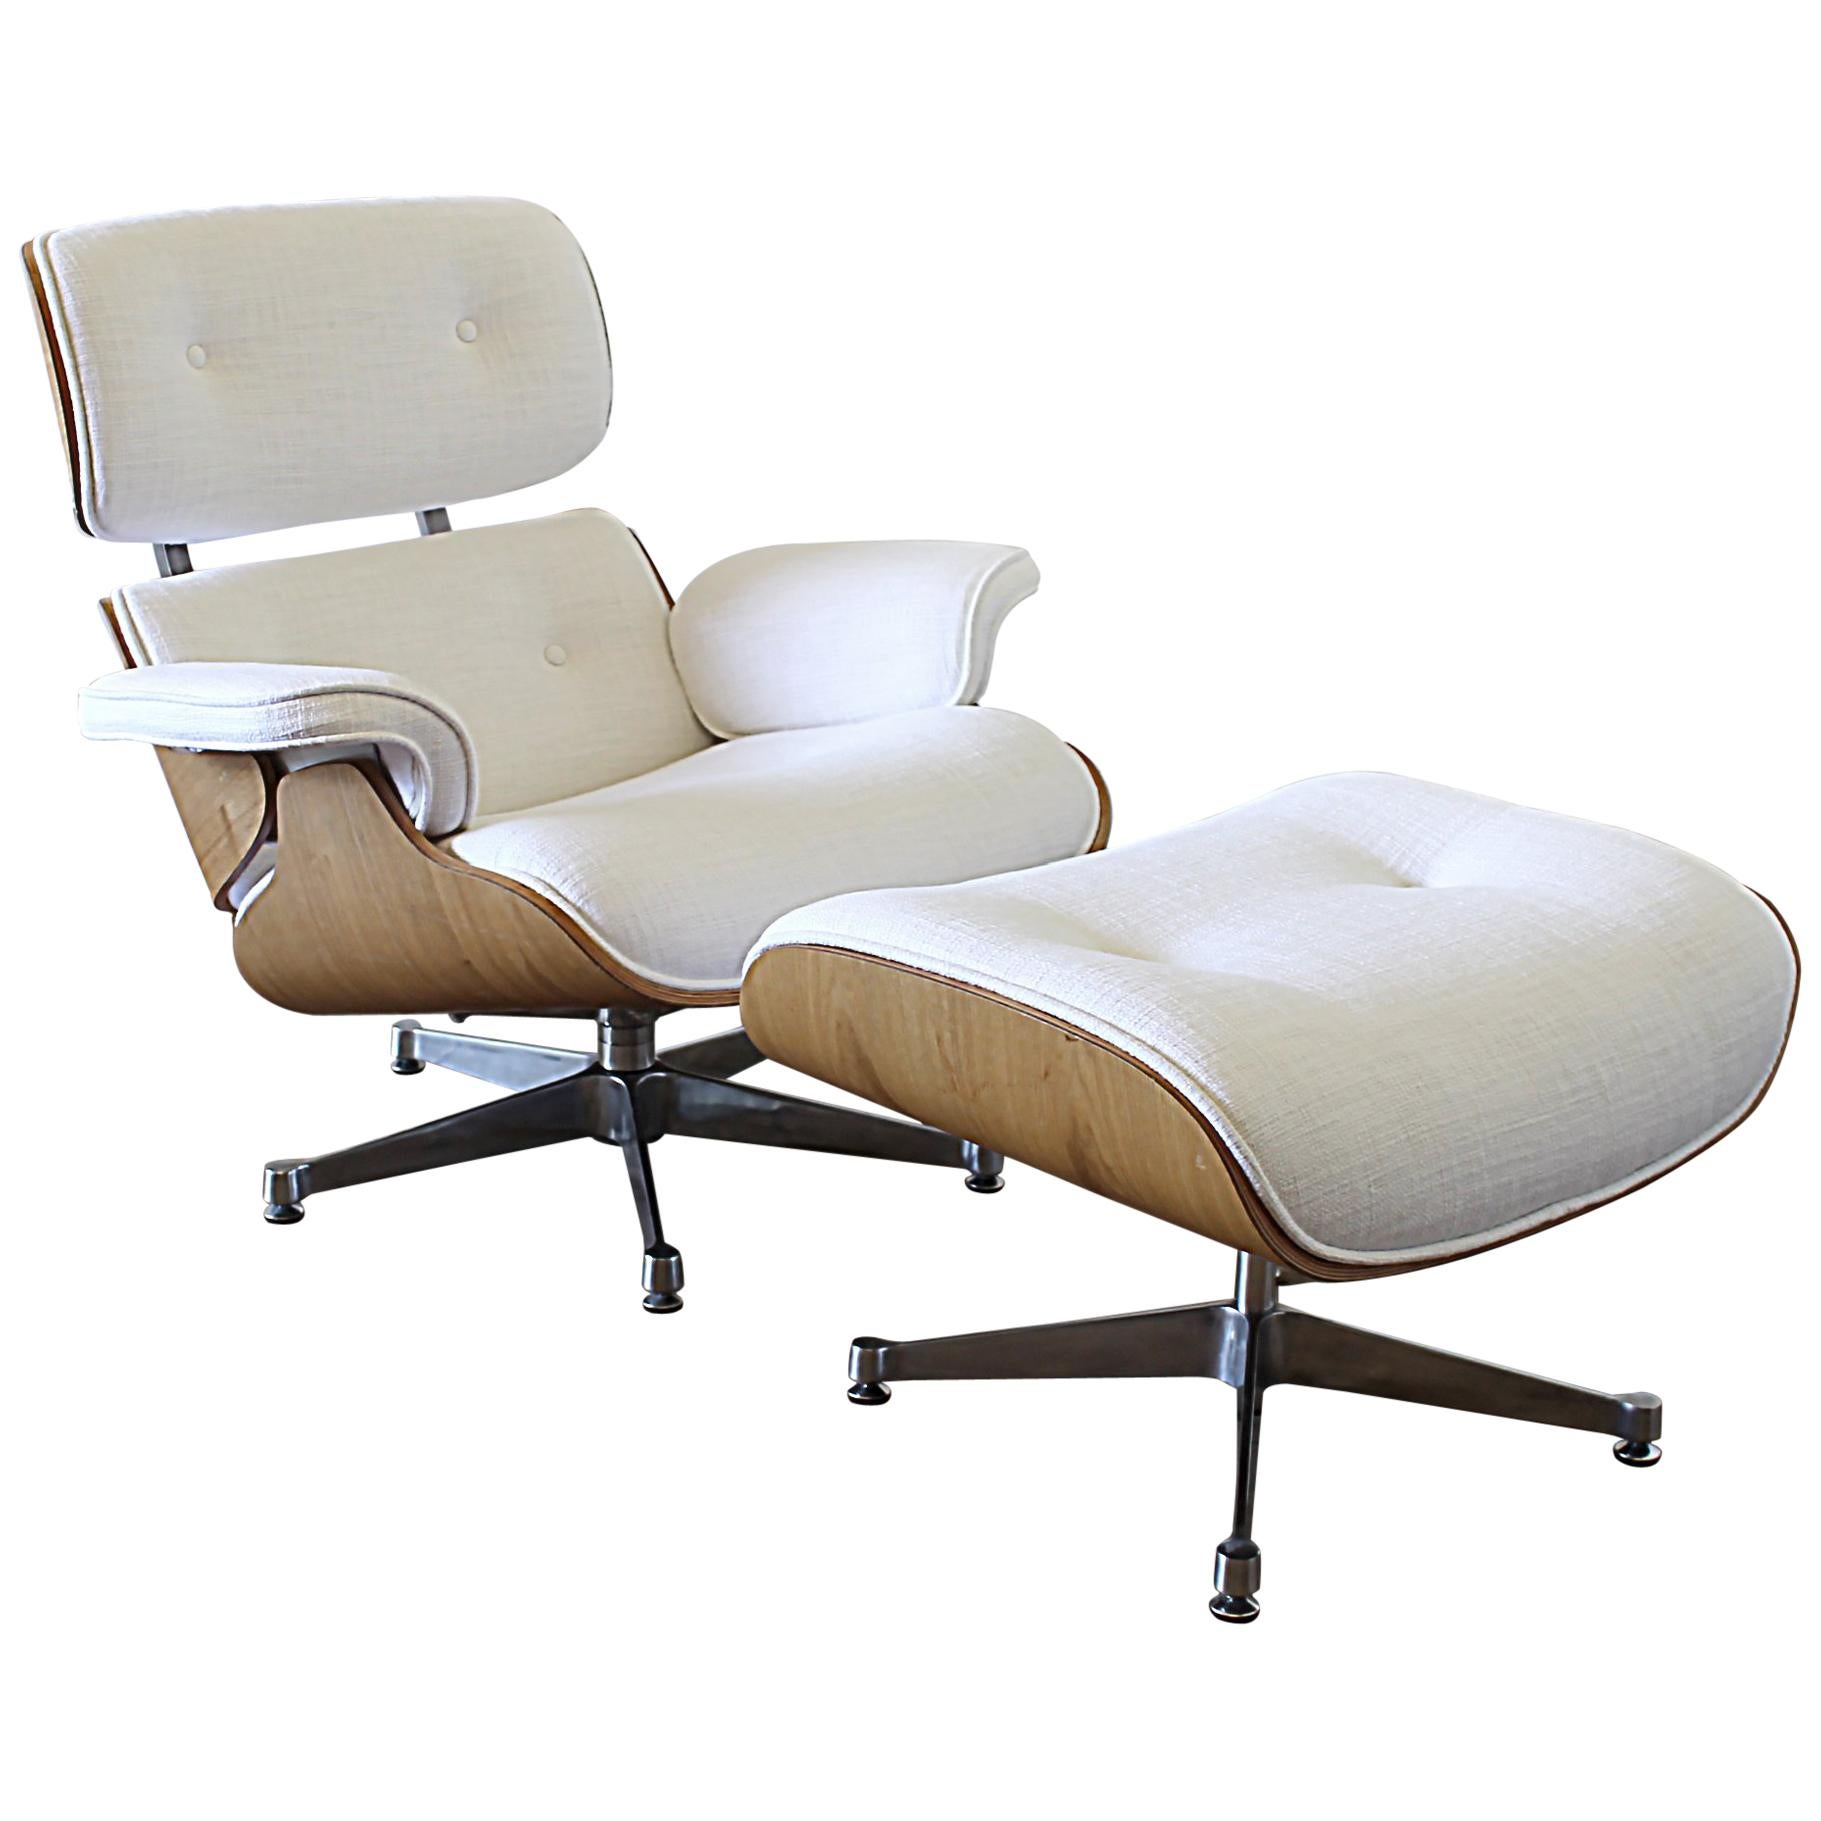 Eames Style Chair and Ottoman in Coated White Linen Blend Upholstery